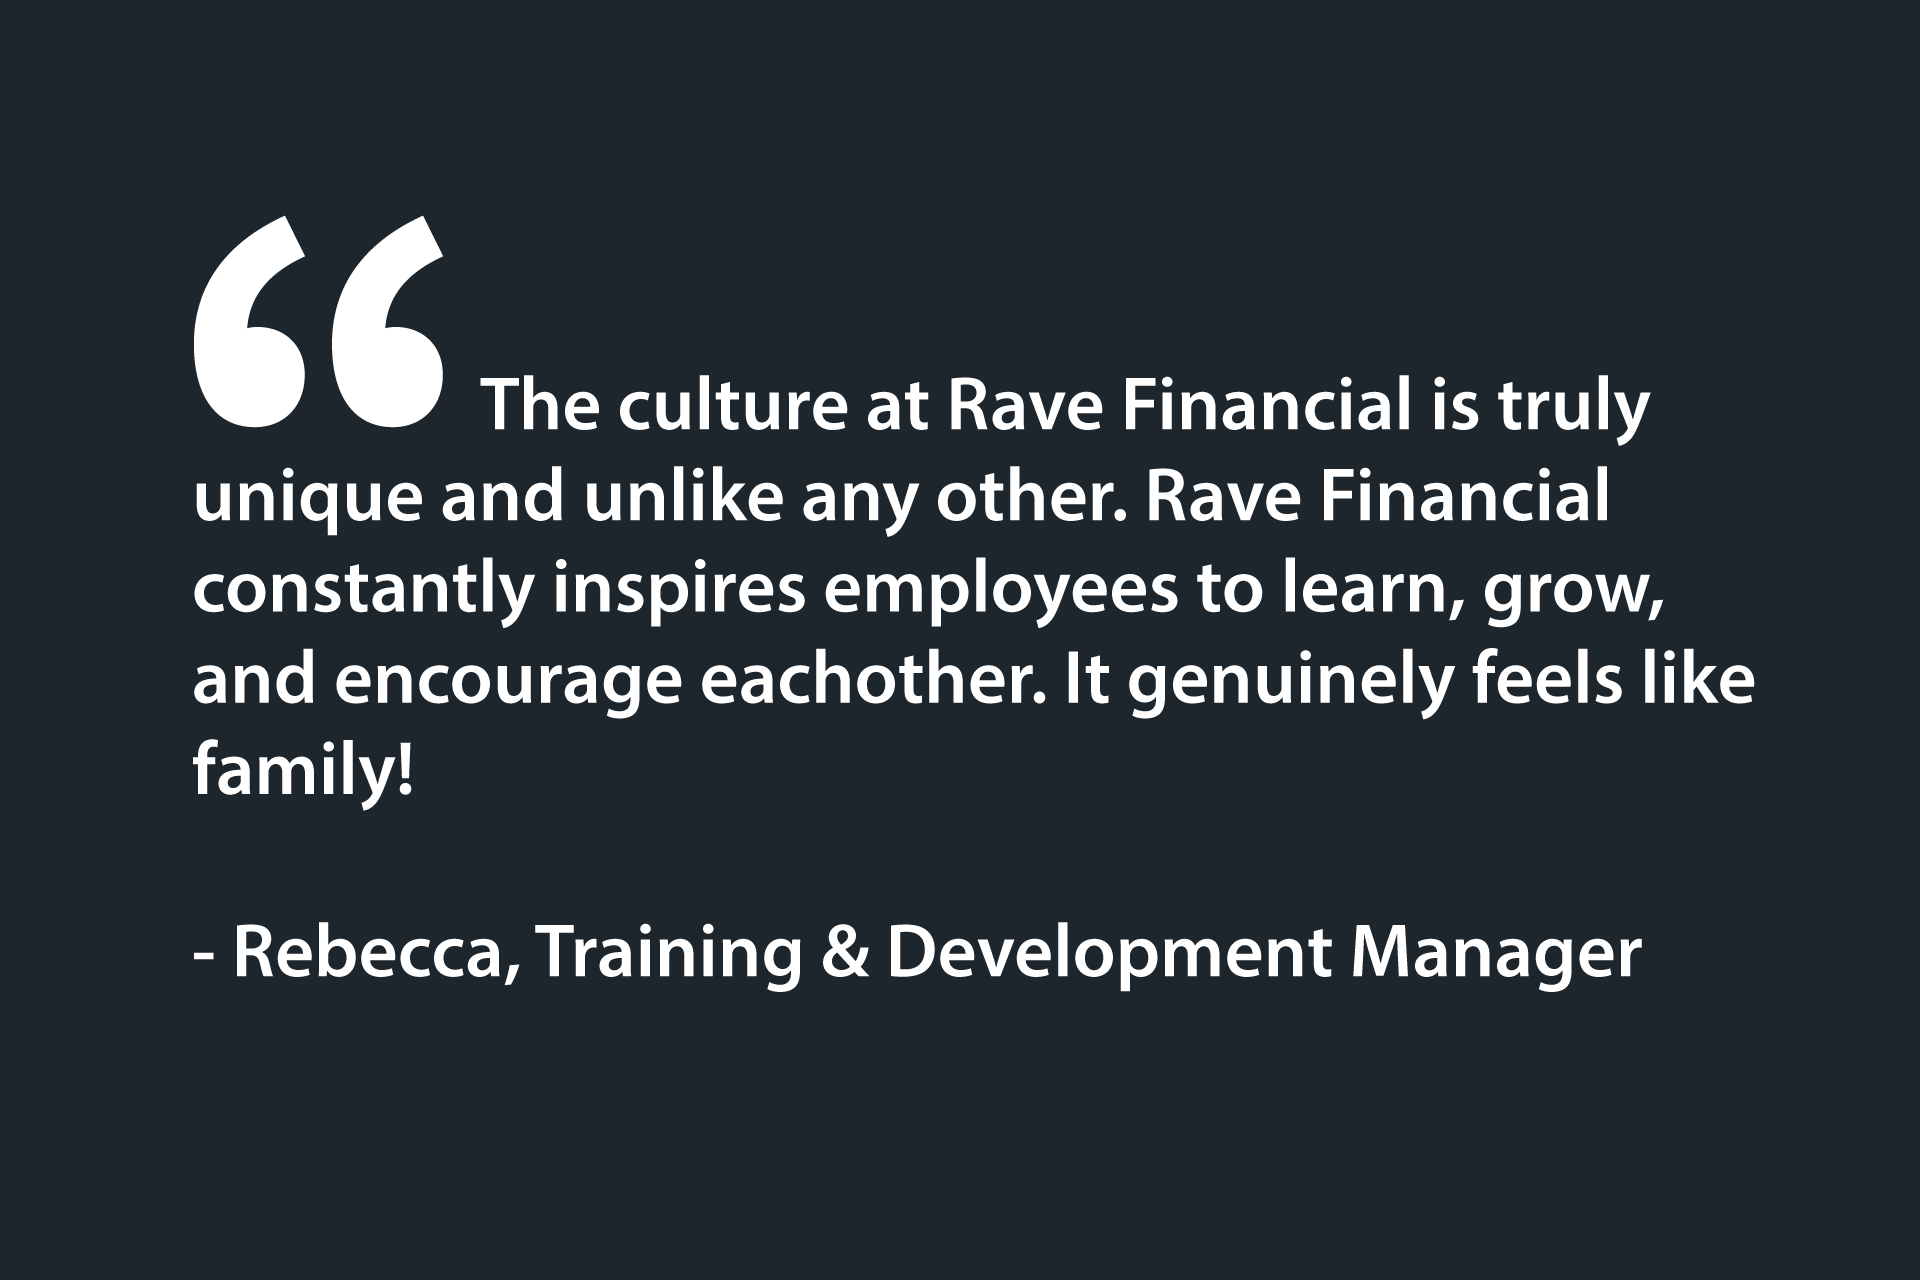 The culture at Rave Financial is truly unique and unlike any other. Rave Financial constantly inspires employees to learn, grow, and encourage eachother. It genuinely feels like family! - Rebecca, Training & Development Manager